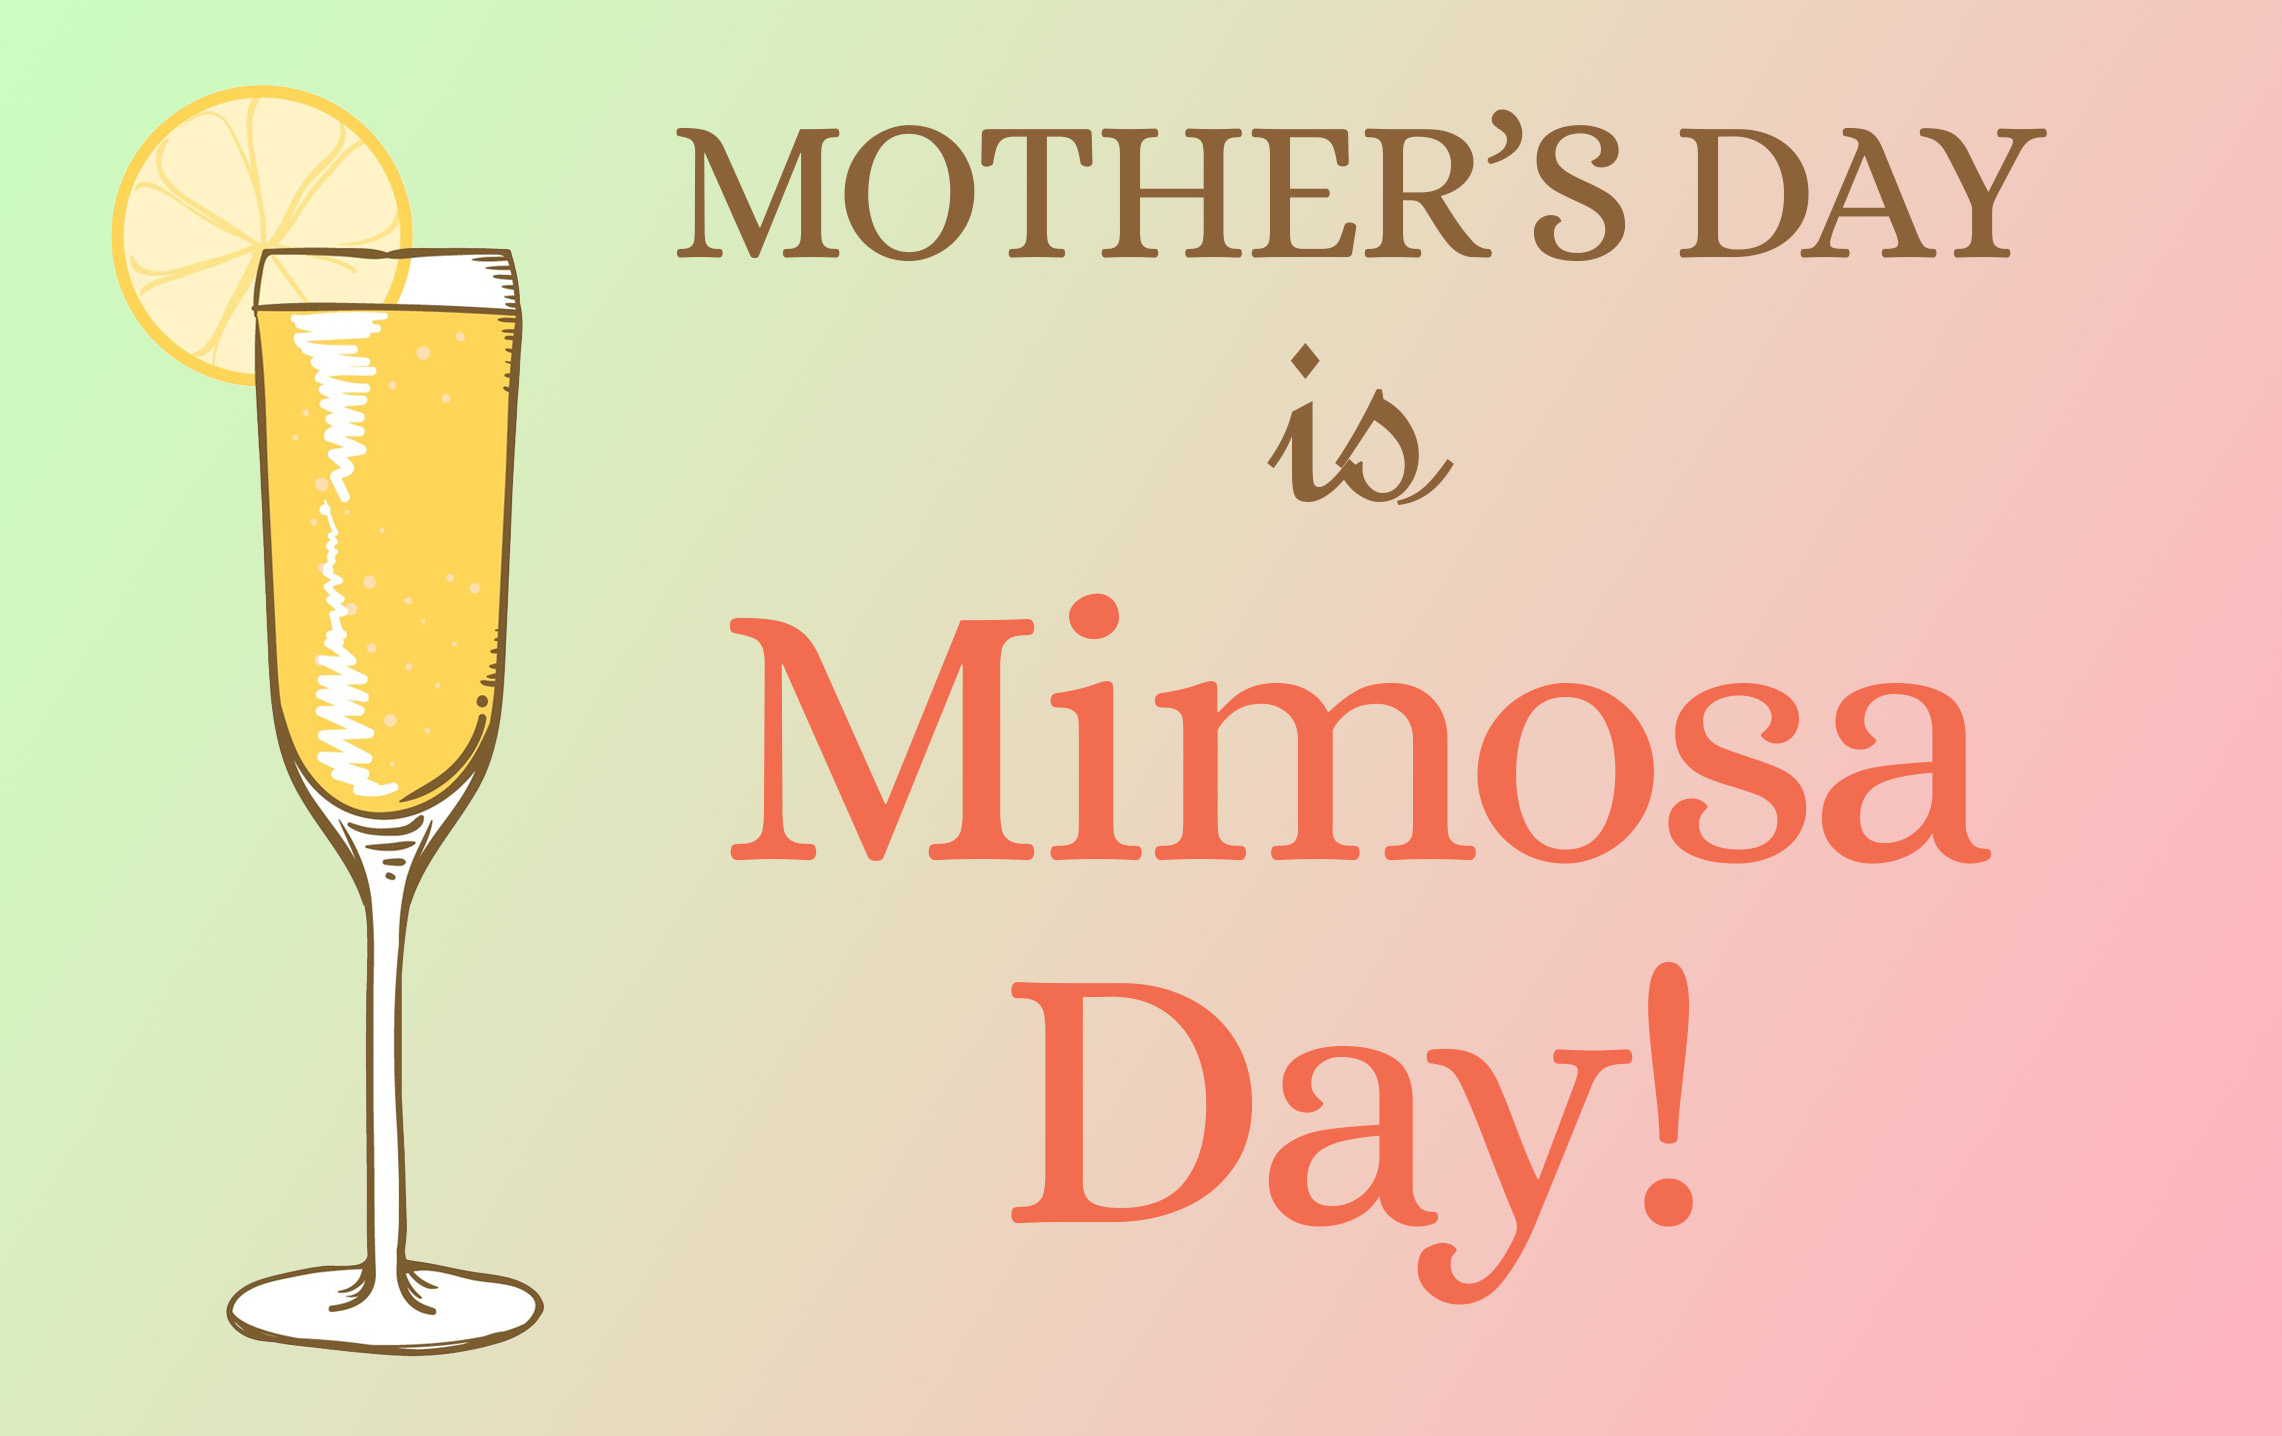 Mimosa glass "Mother's Day is Momosa Day"